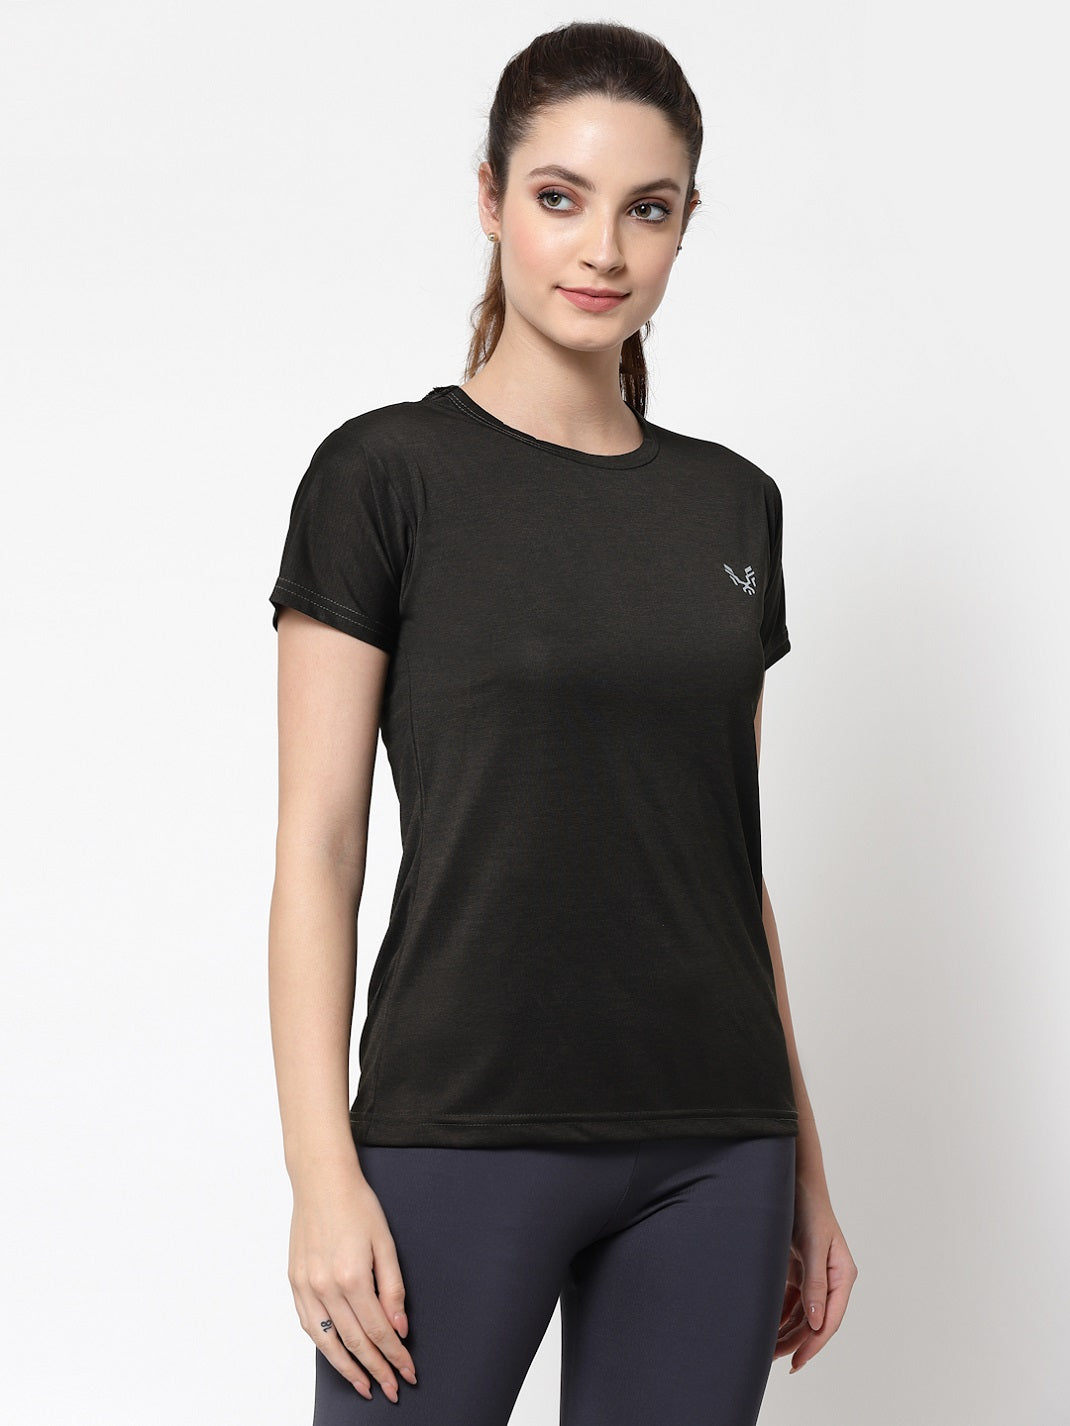 Women Penta Top T Shirt Stretchable Gym Wear at Rs 200/piece, Fitness, Gym  & Yoga Wear in Faridabad